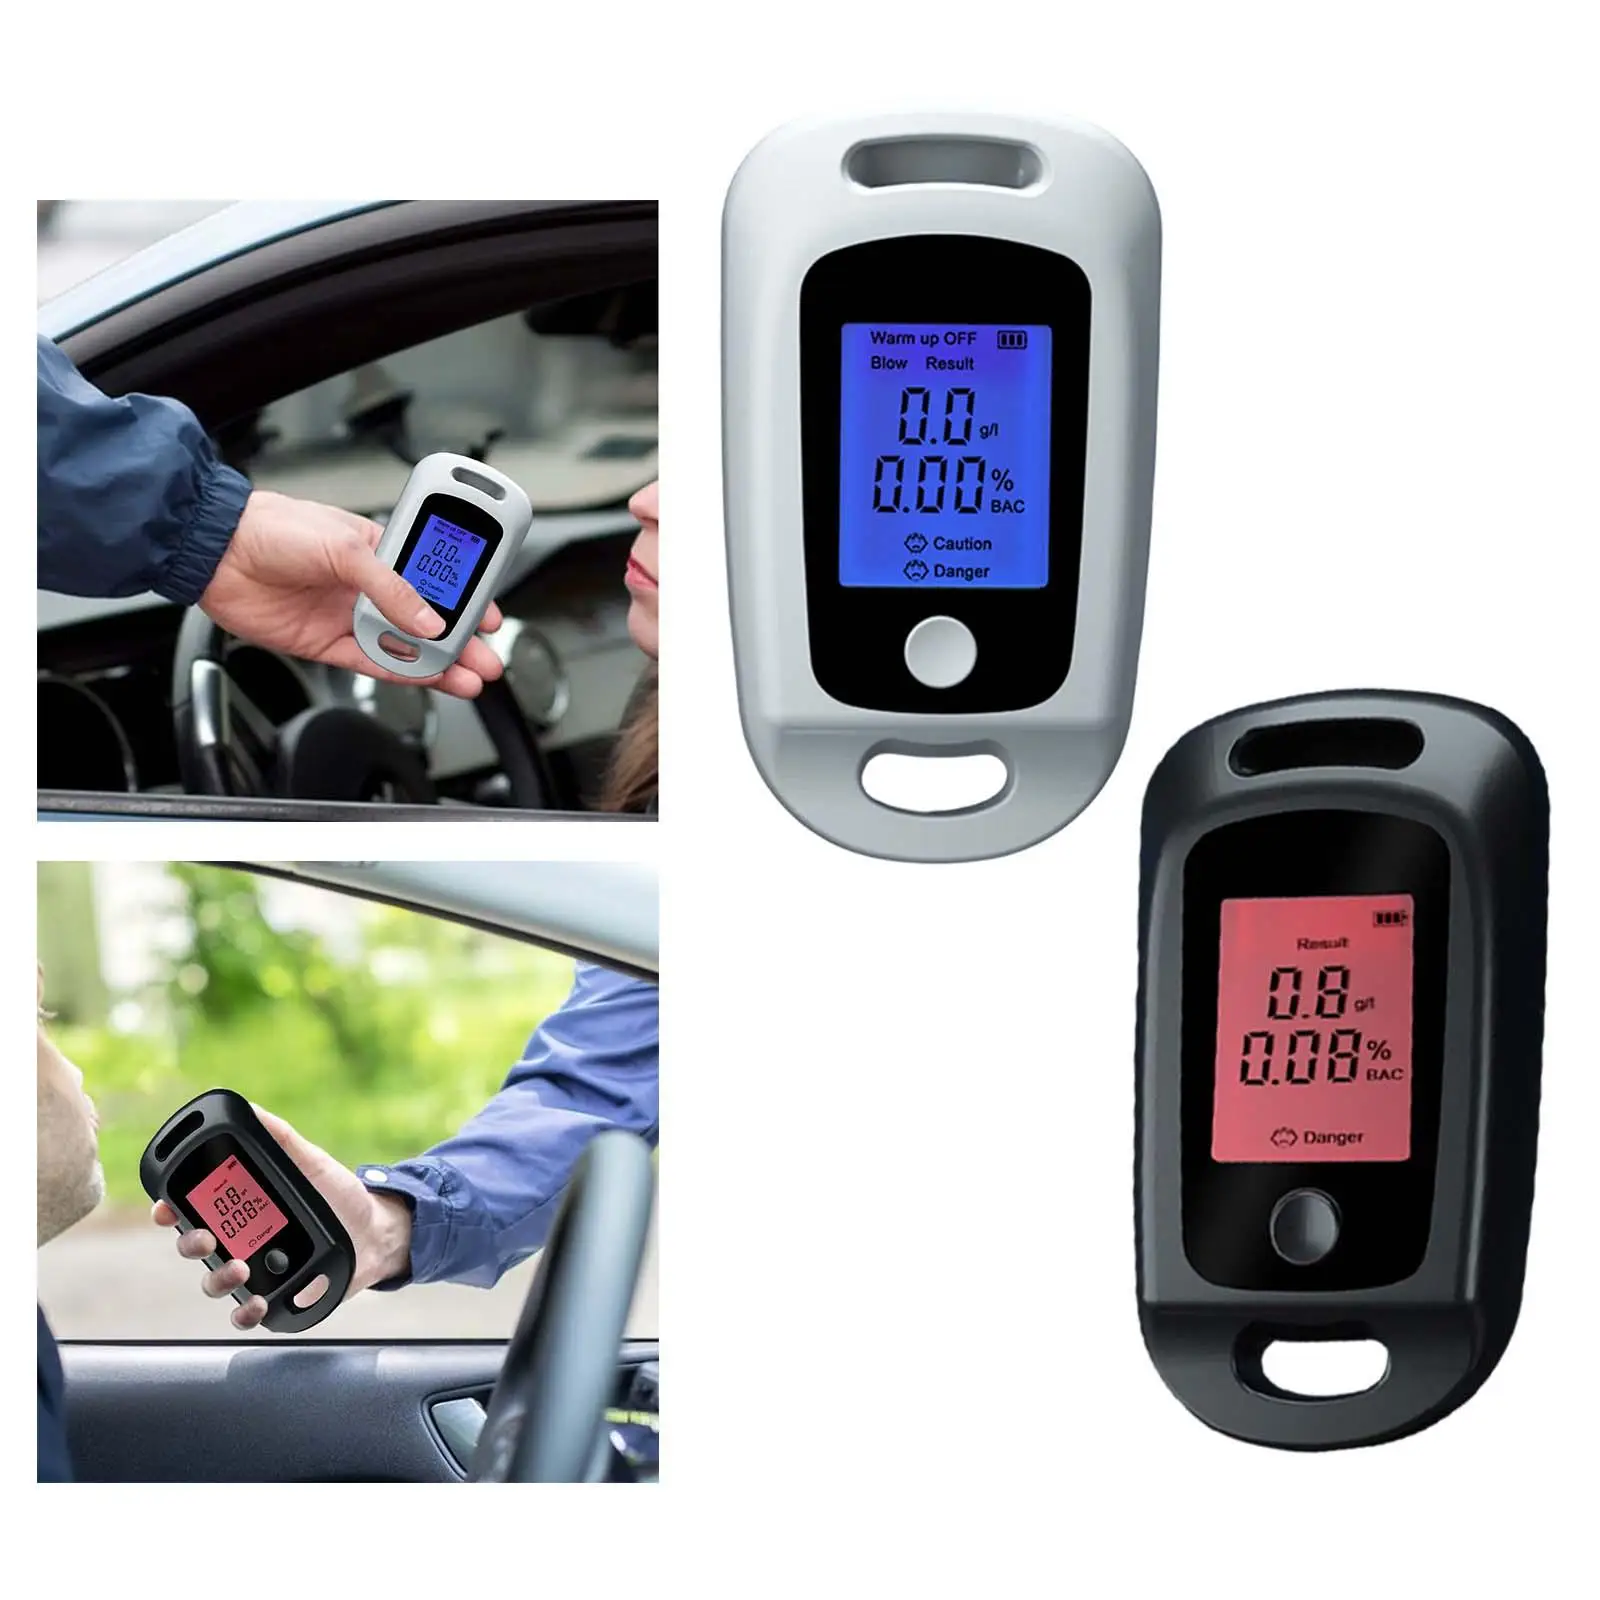 Alcohol Tester LCD Display Screen Digital Mini Air Blowing High Accuracy Breath Drunk Driving Analyzer for Personal Drivers